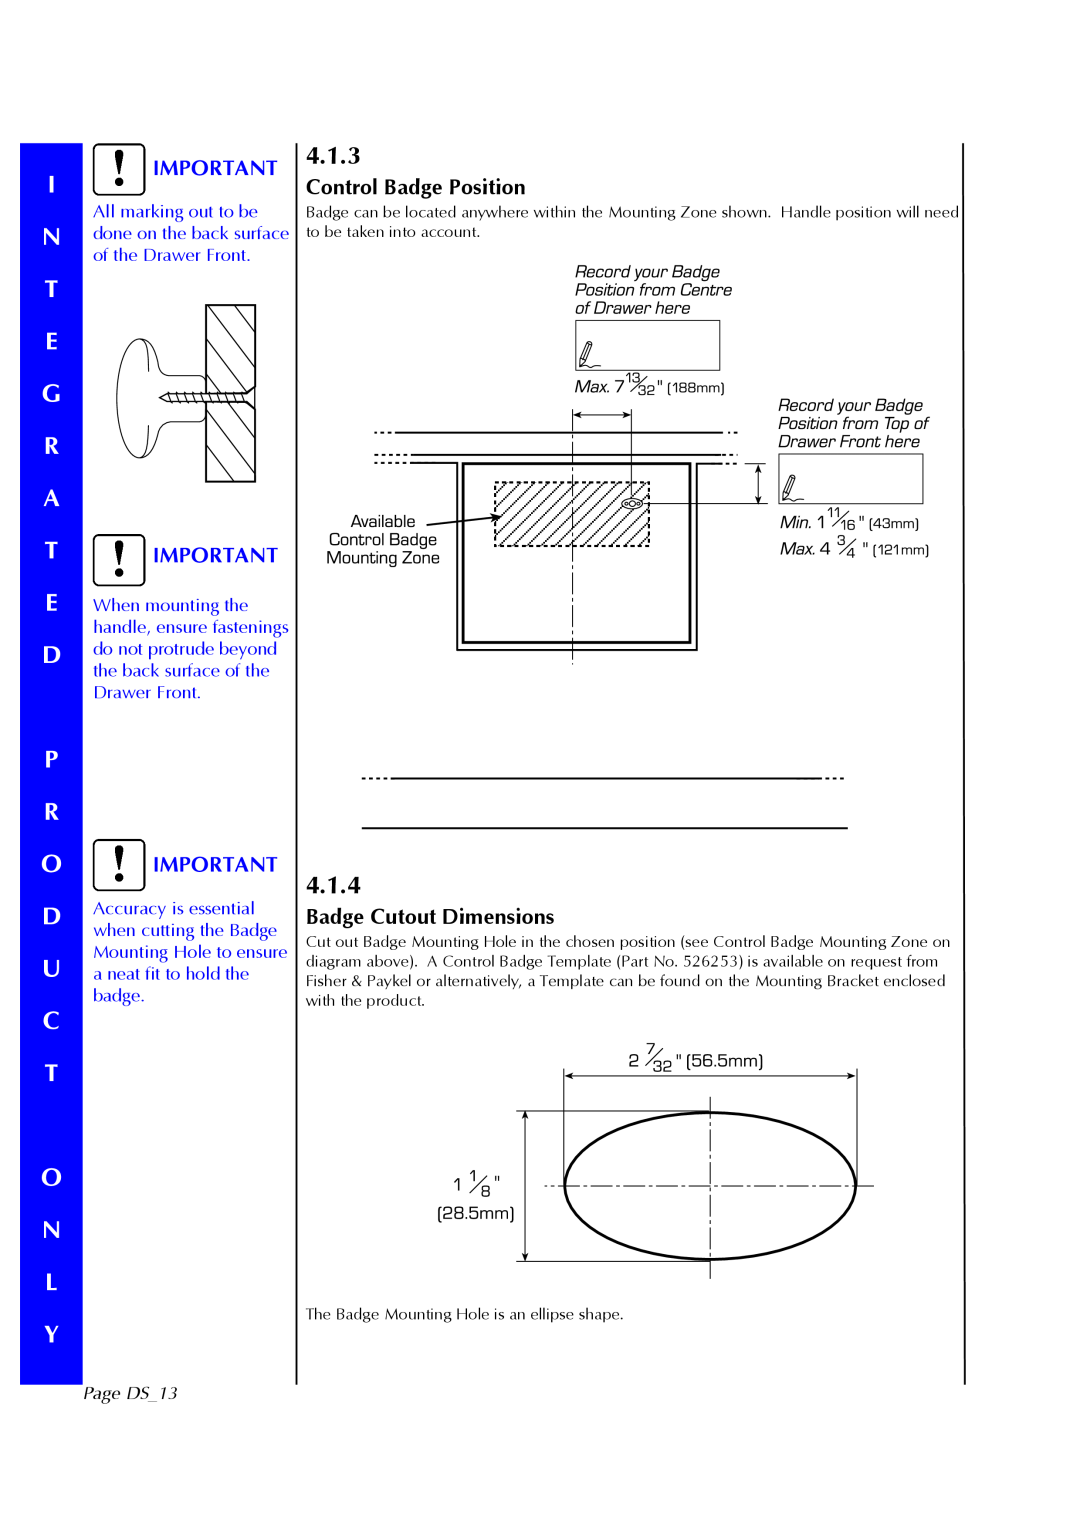 Fisher & Paykel DS602I manual 4.1.3, 4.1.4, Control Badge Position, Badge Cutout Dimensions, Page DS13 